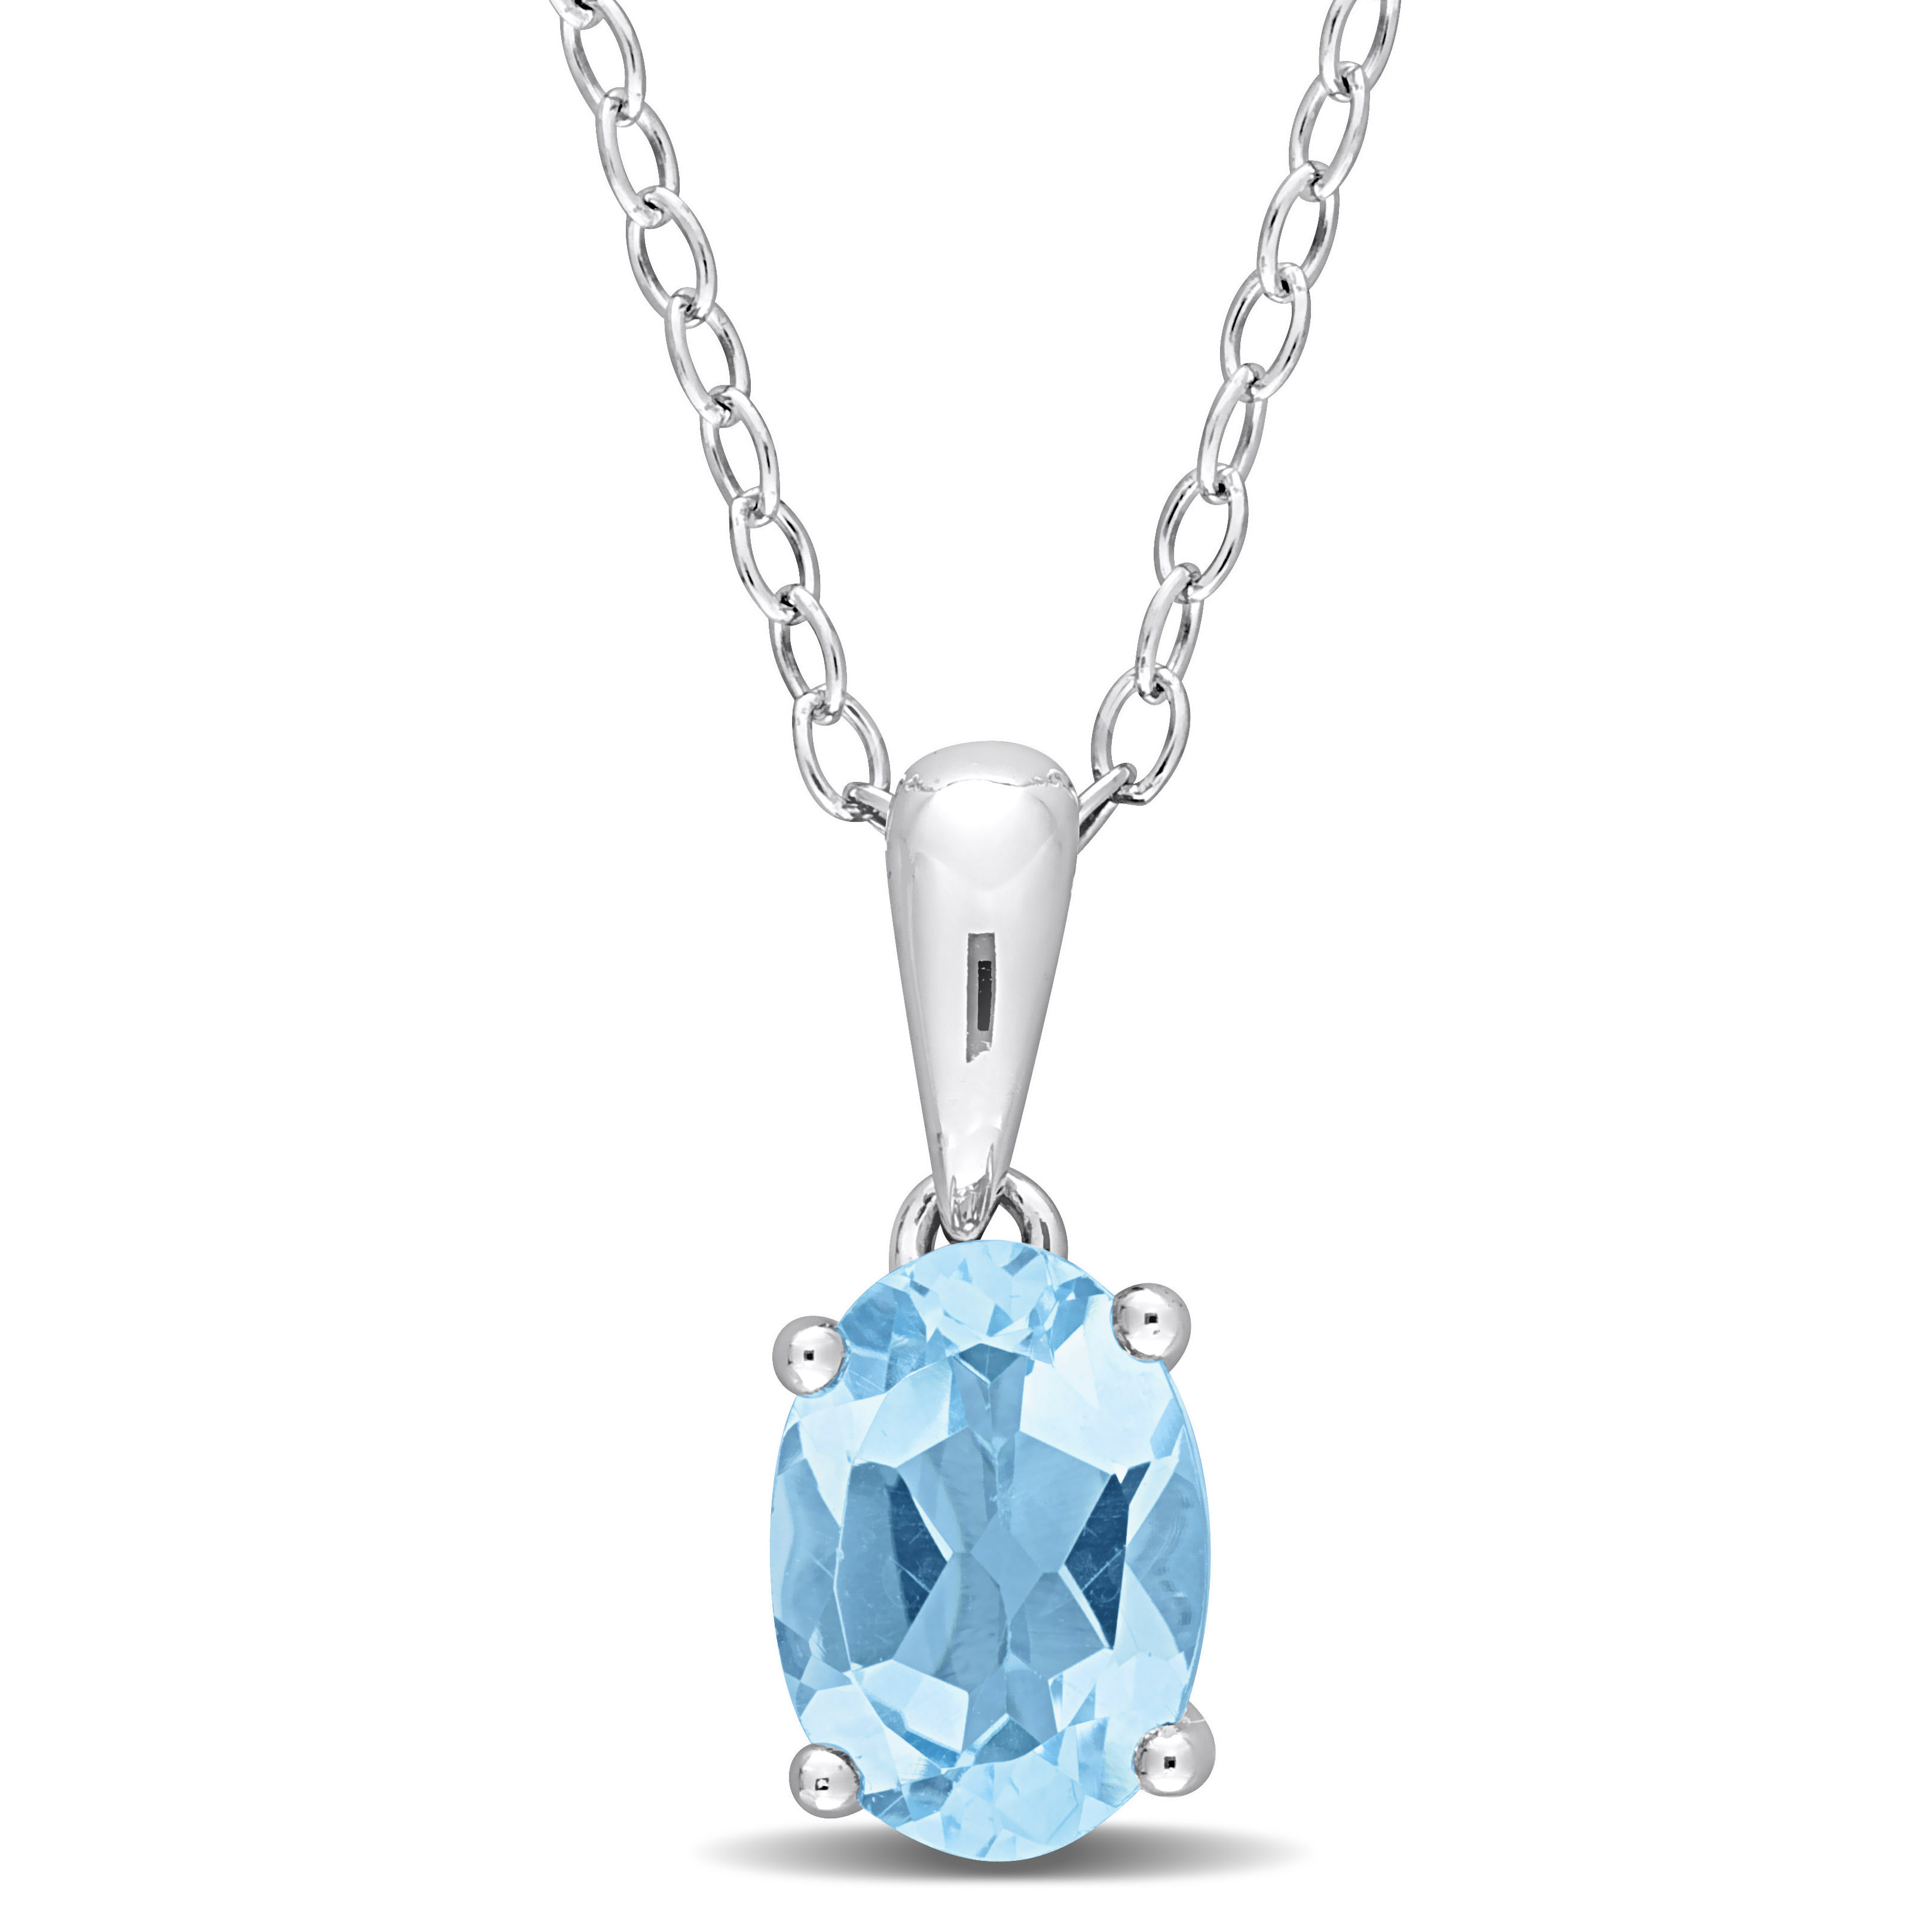 1 CT TGW Oval Sky Blue Topaz Solitaire Heart Design Pendant with Chain in Sterling Silver - 18 in.